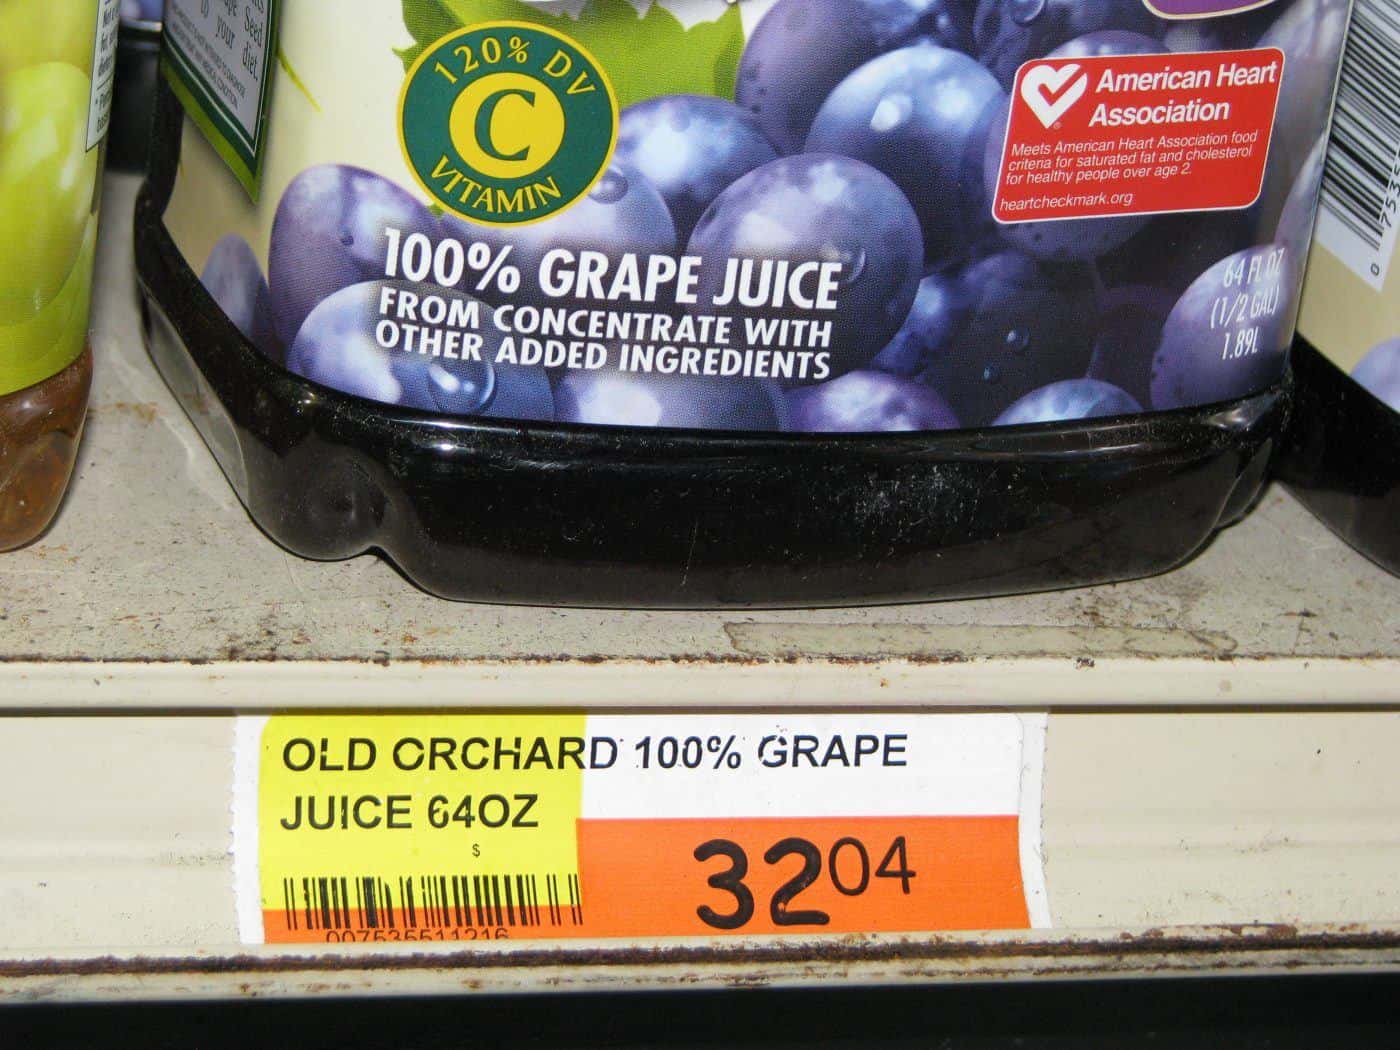 Prices in dominica are high for Old Orchard grape juice: EC$32.04